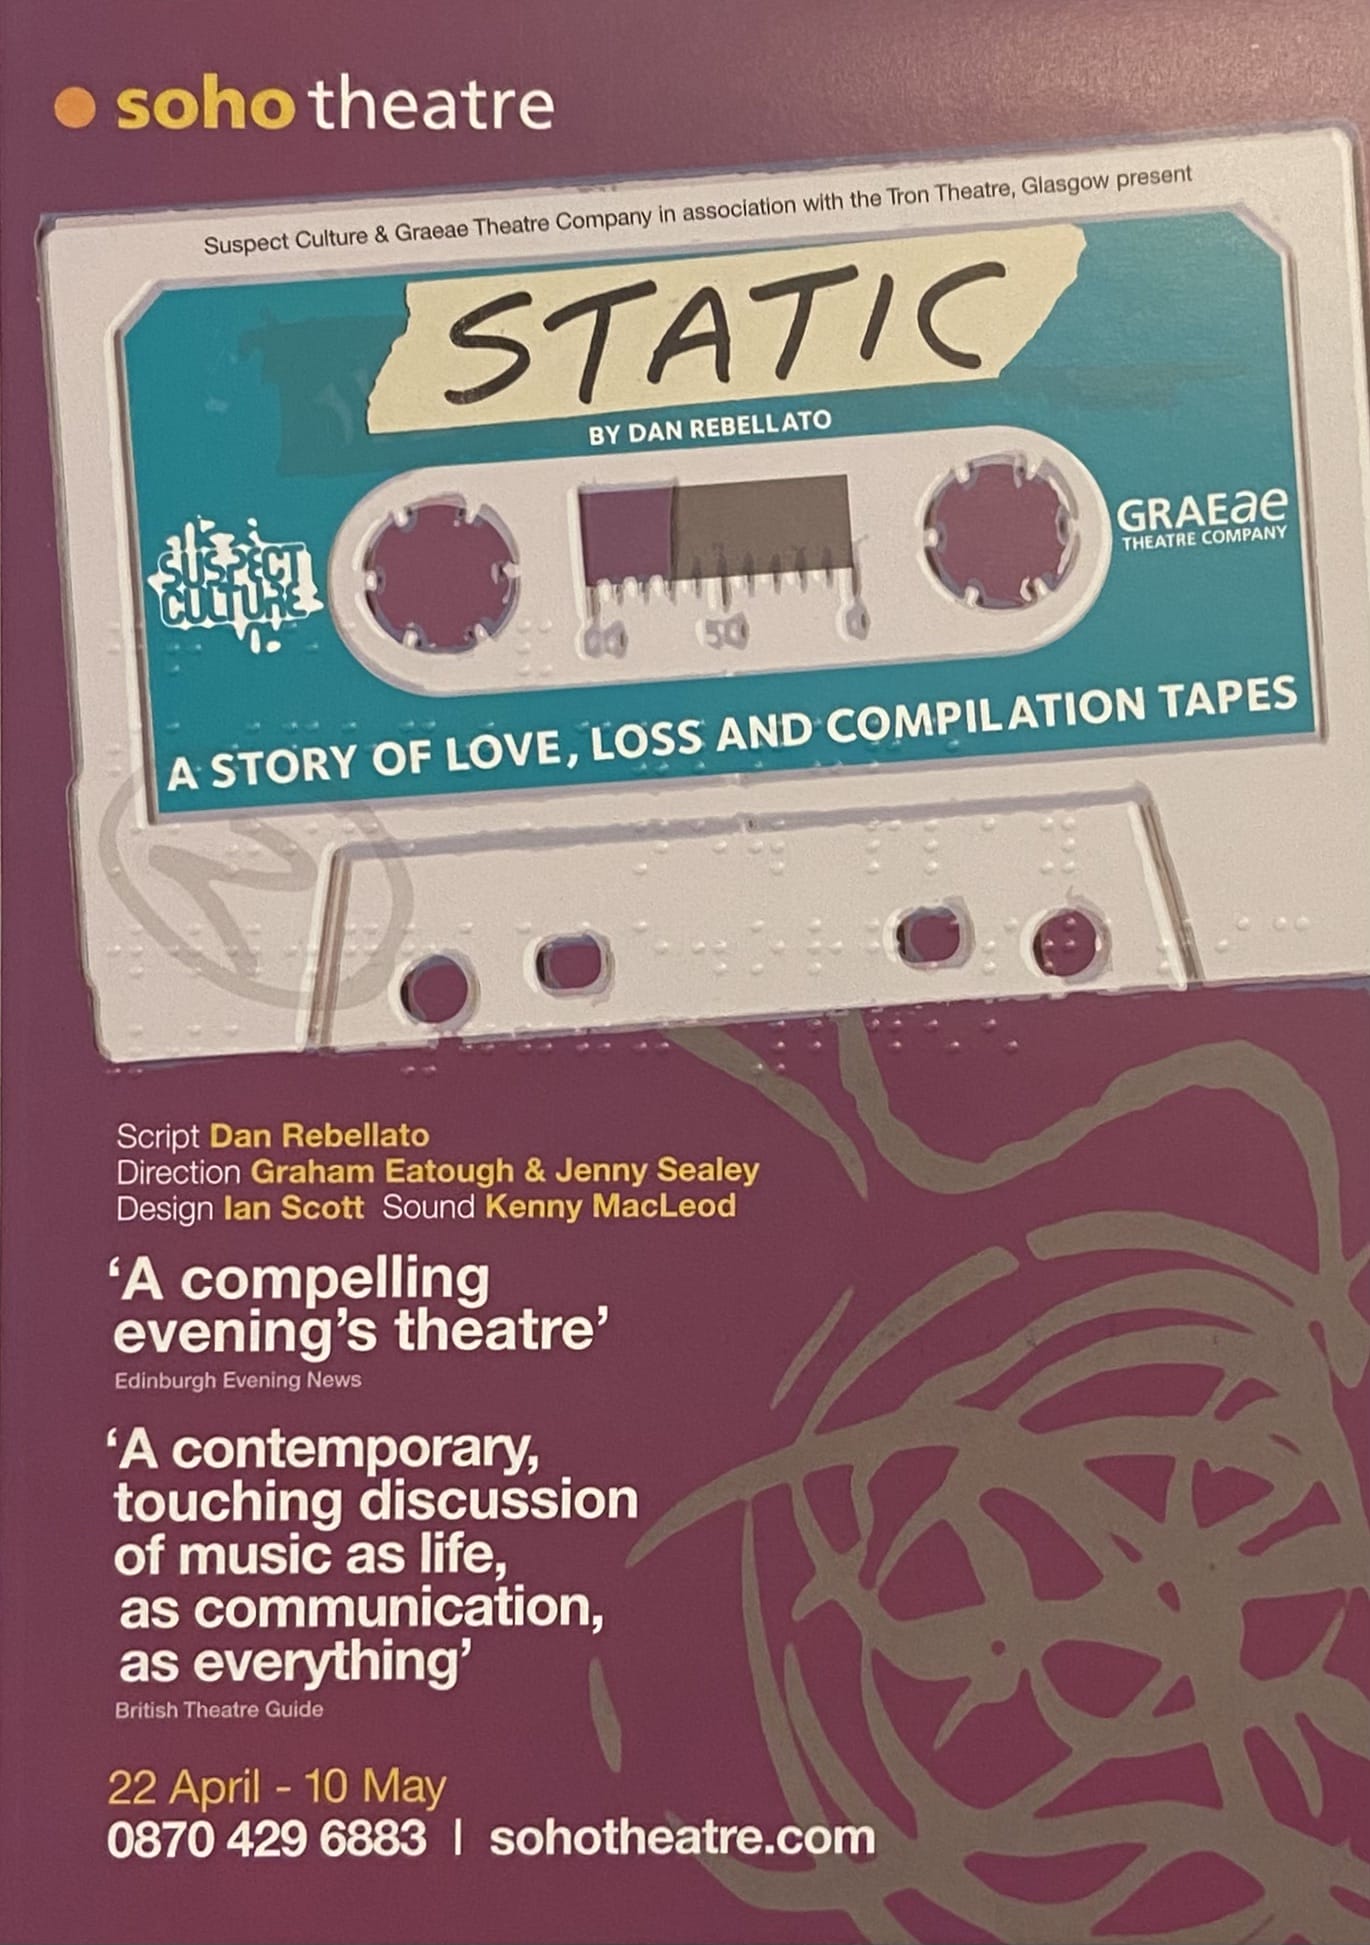 A poster for Graeae's production of 'Static' by Dan Rebellato. The poster is purple with a blue casette tape that has 